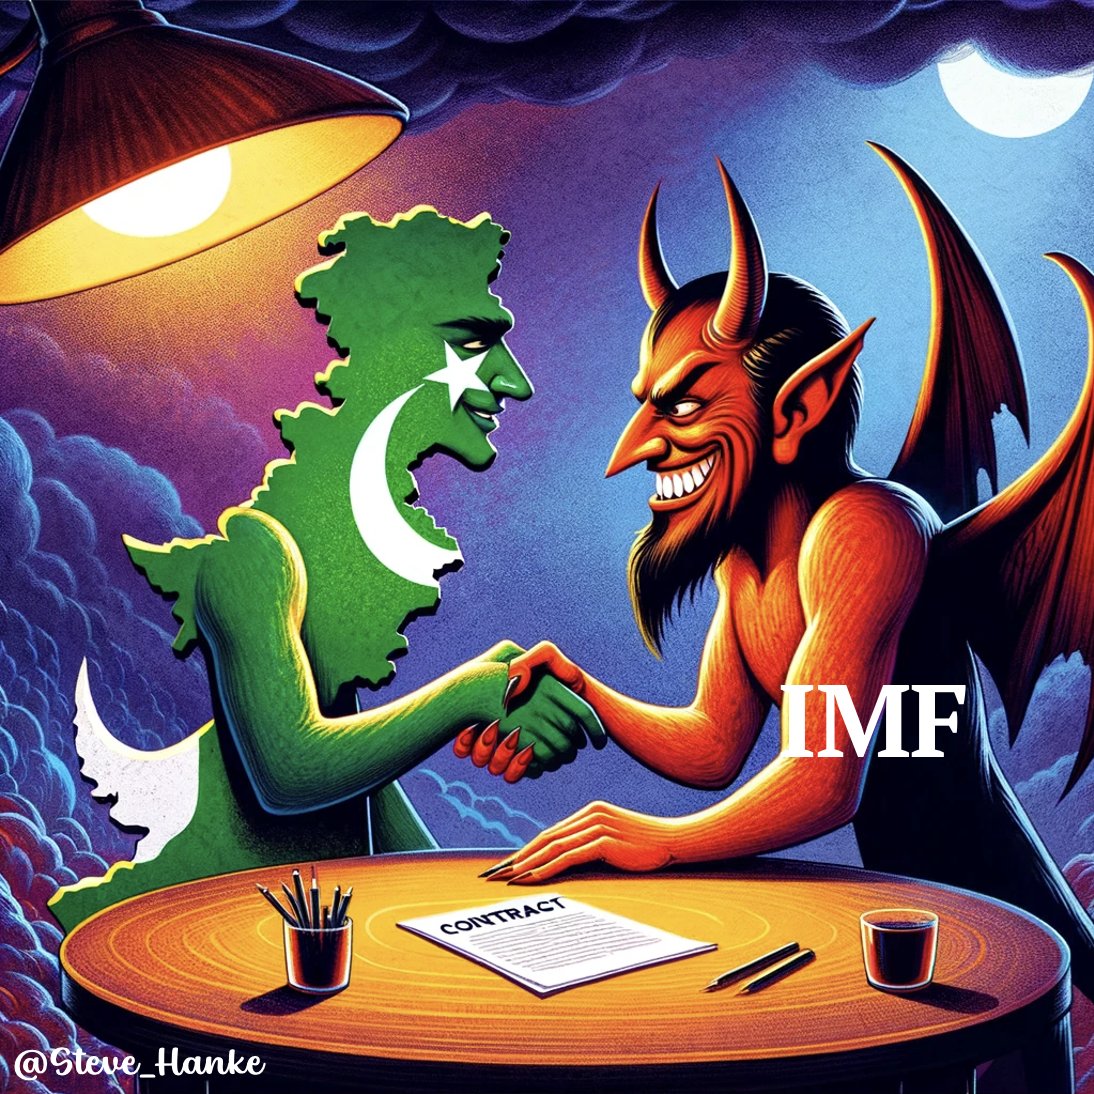 #PAKWatch🇵🇰:

Another $1.1 billion deal with the IMF 
= PAK DROWNING IN DEBT